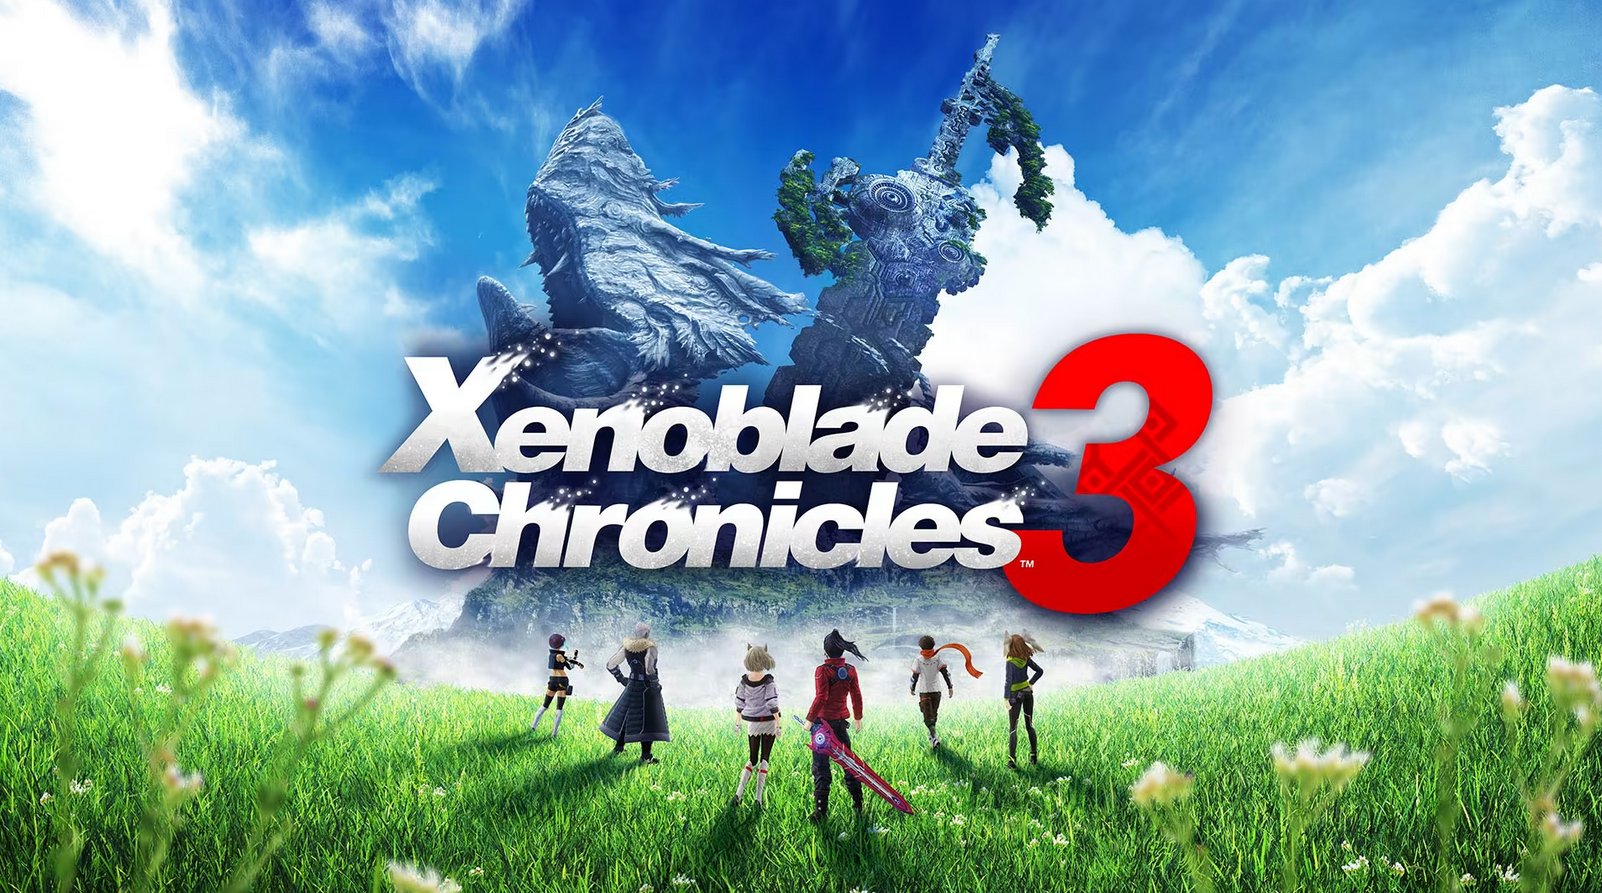 metacritic on X: Expect Xenoblade Chronicles 3 reviews on Tuesday starting  at 6am Pacific:  #XenobladeChronicles3 Any early  Metascore predictions for this one?  / X